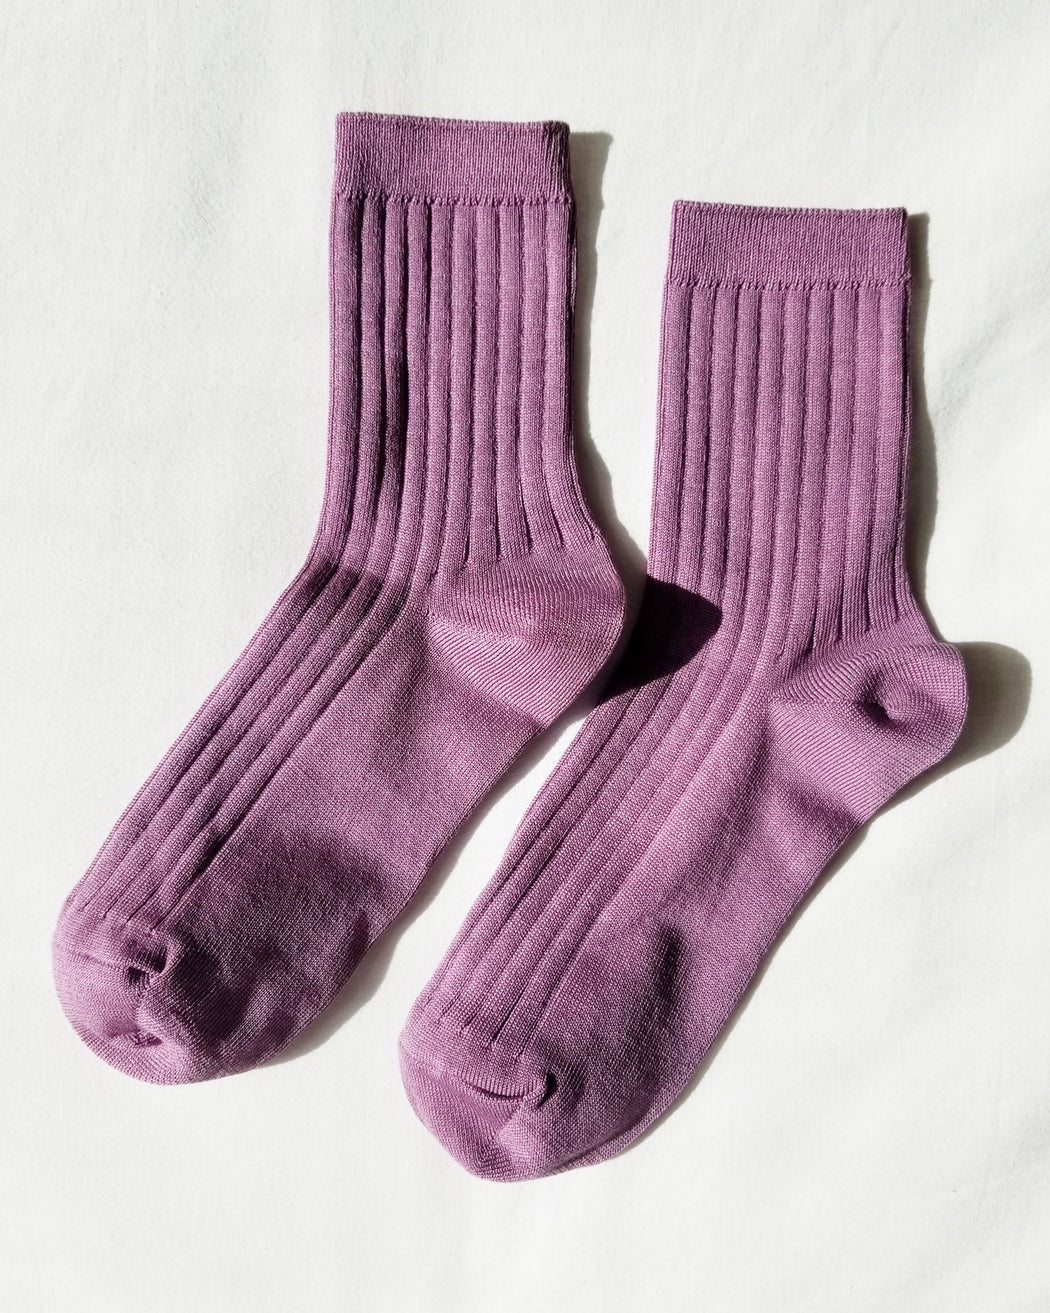 Her Socks – Orchid